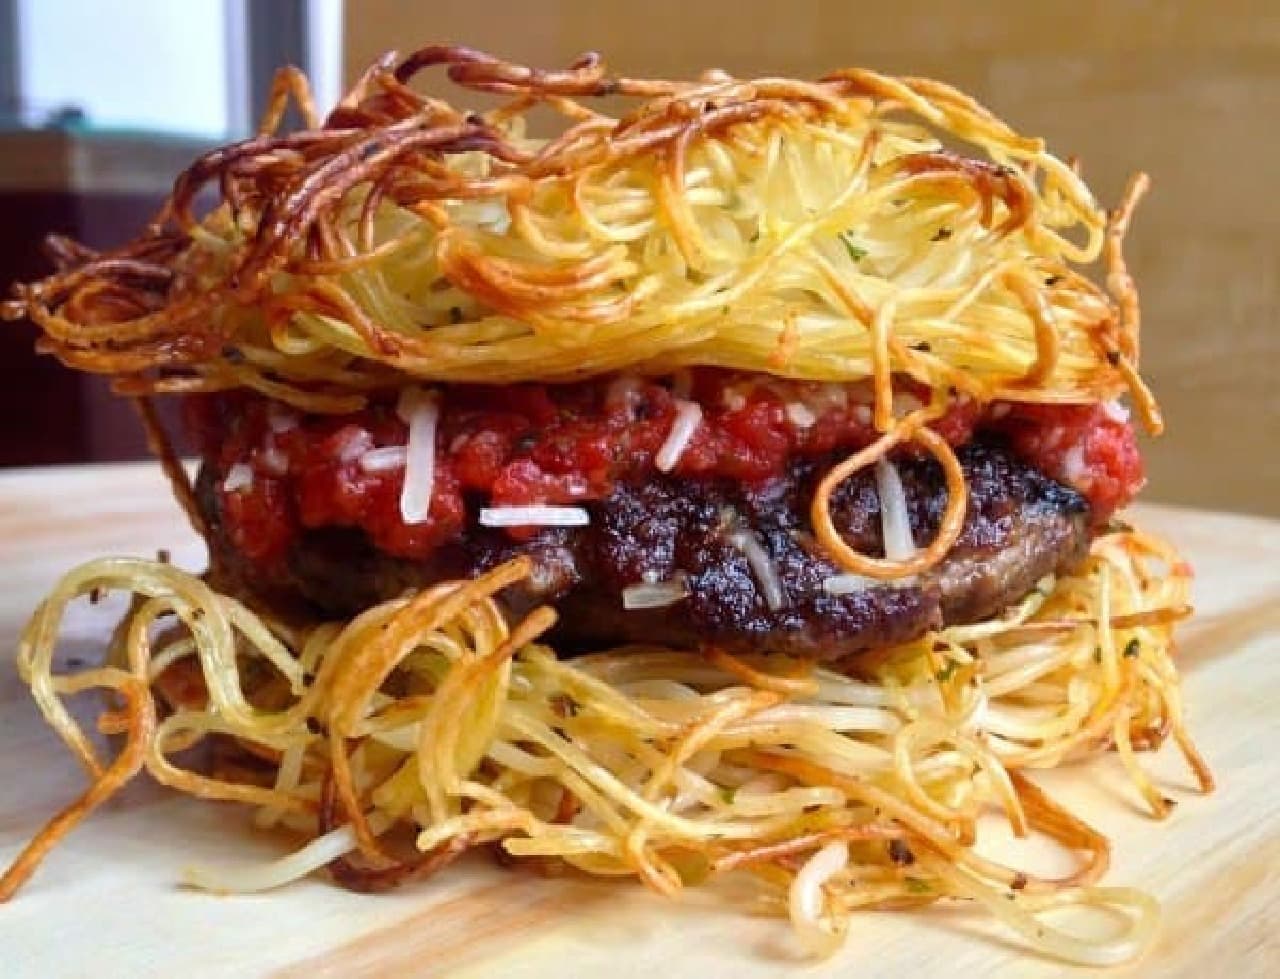 A combination of ideas like a children's lunch (spaghetti burger / source: official Facebook page)